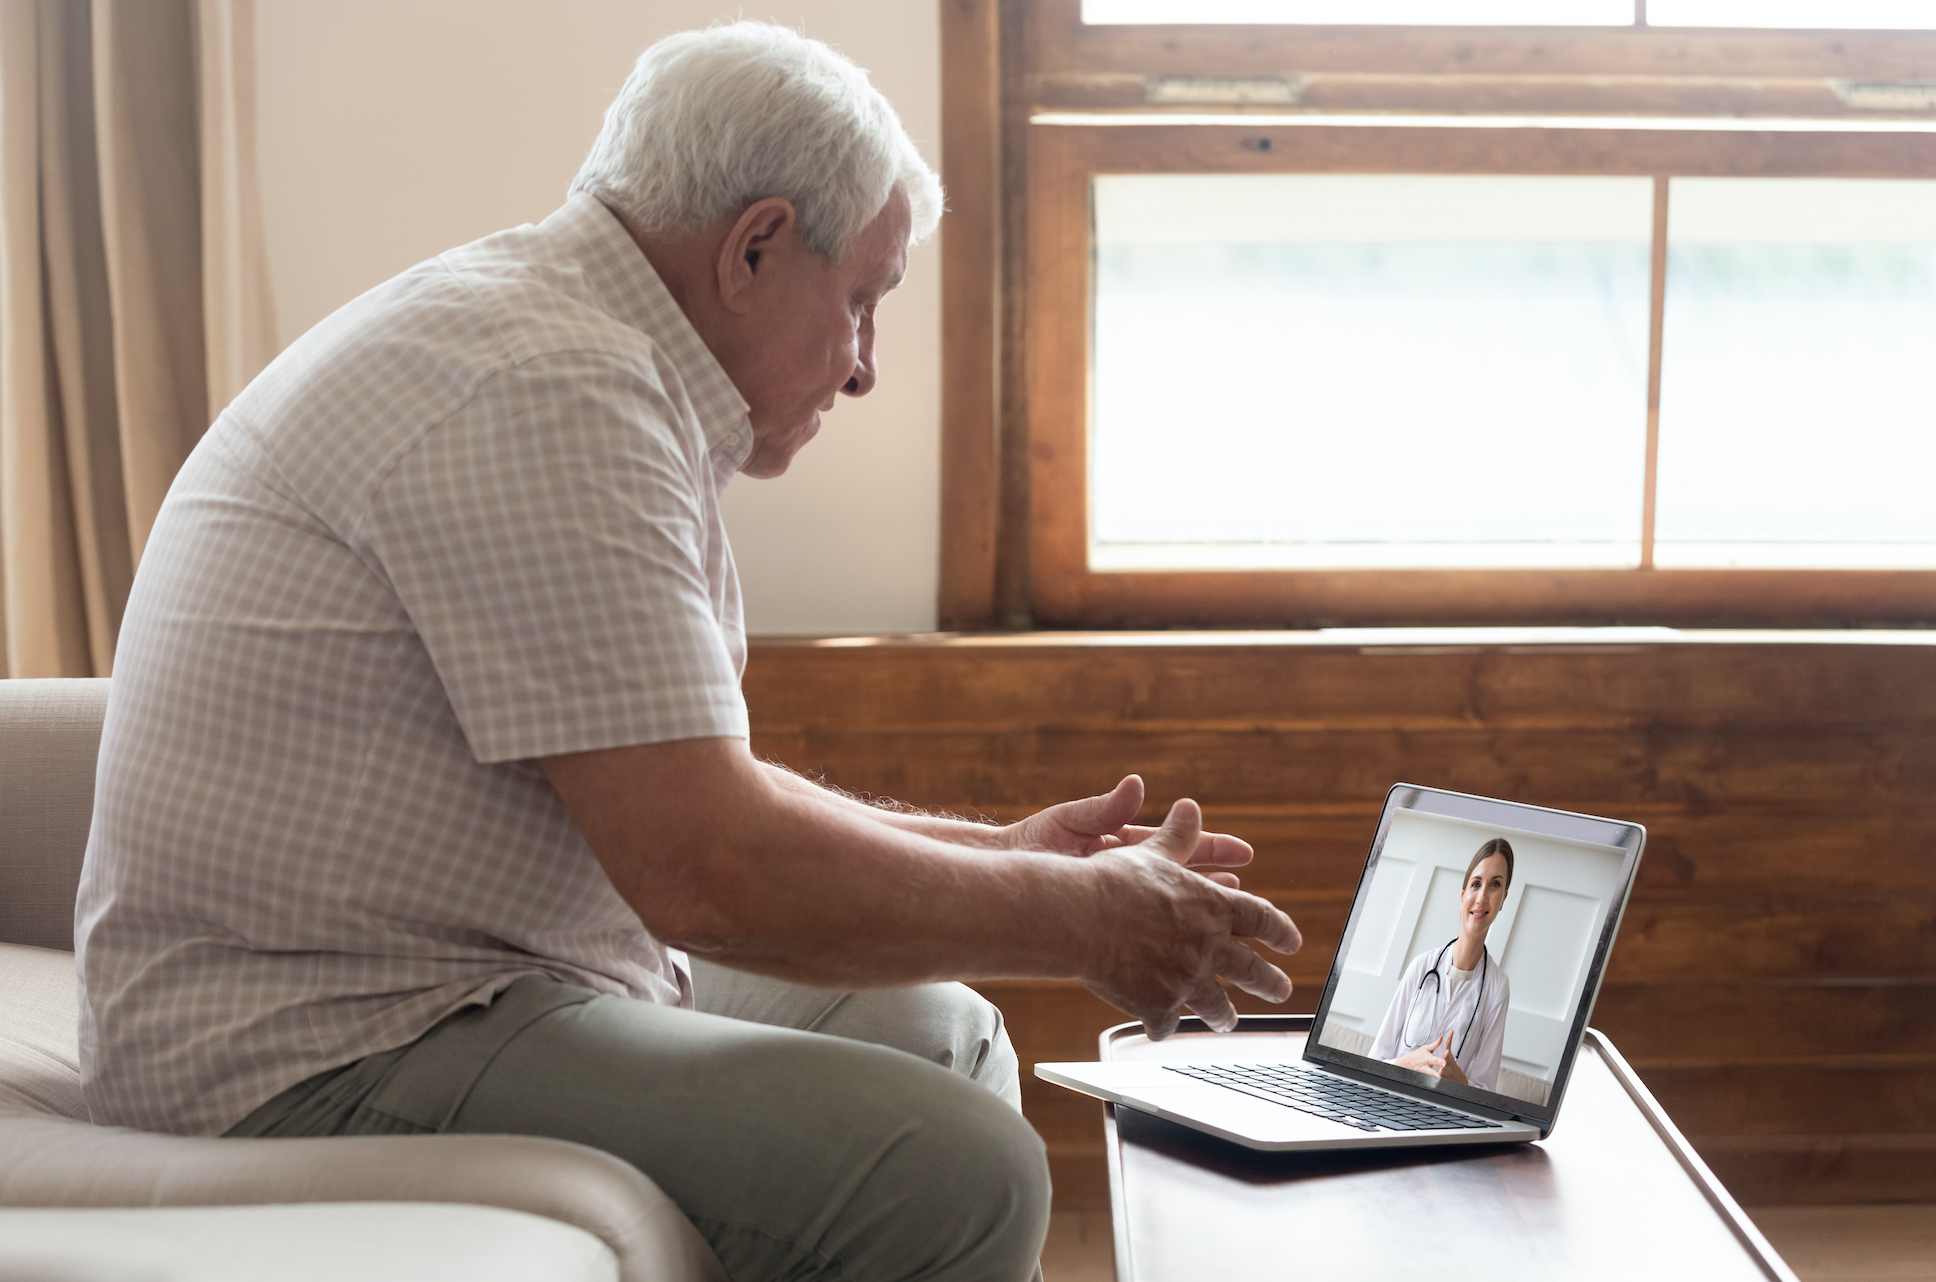 An older man uses telehealth with a doctor on his laptop